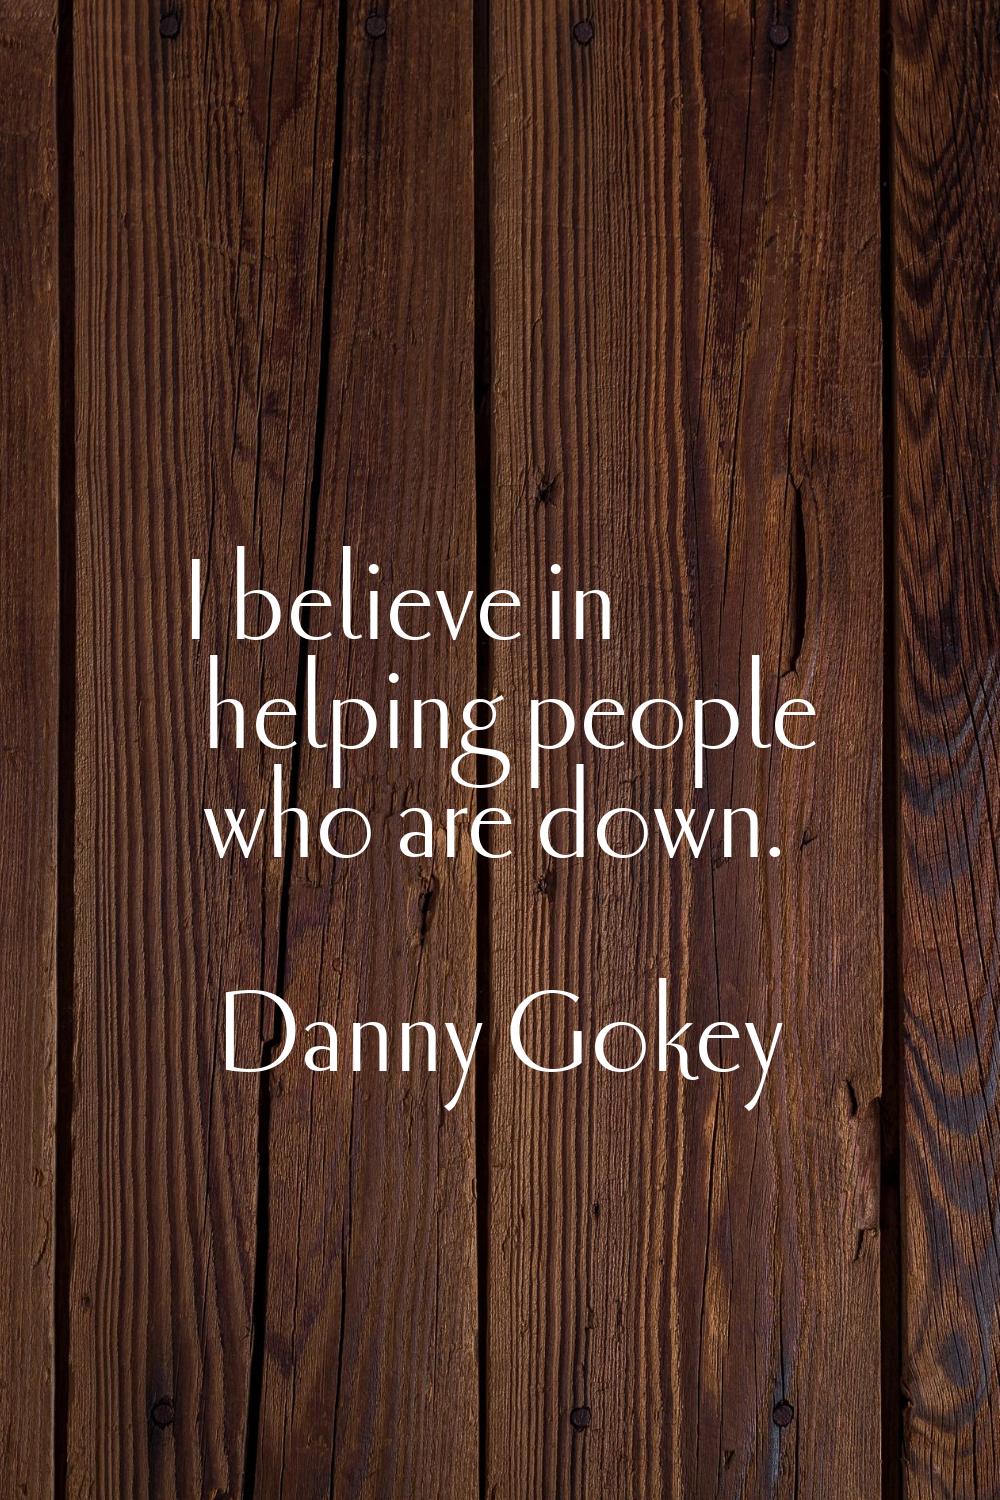 I believe in helping people who are down.